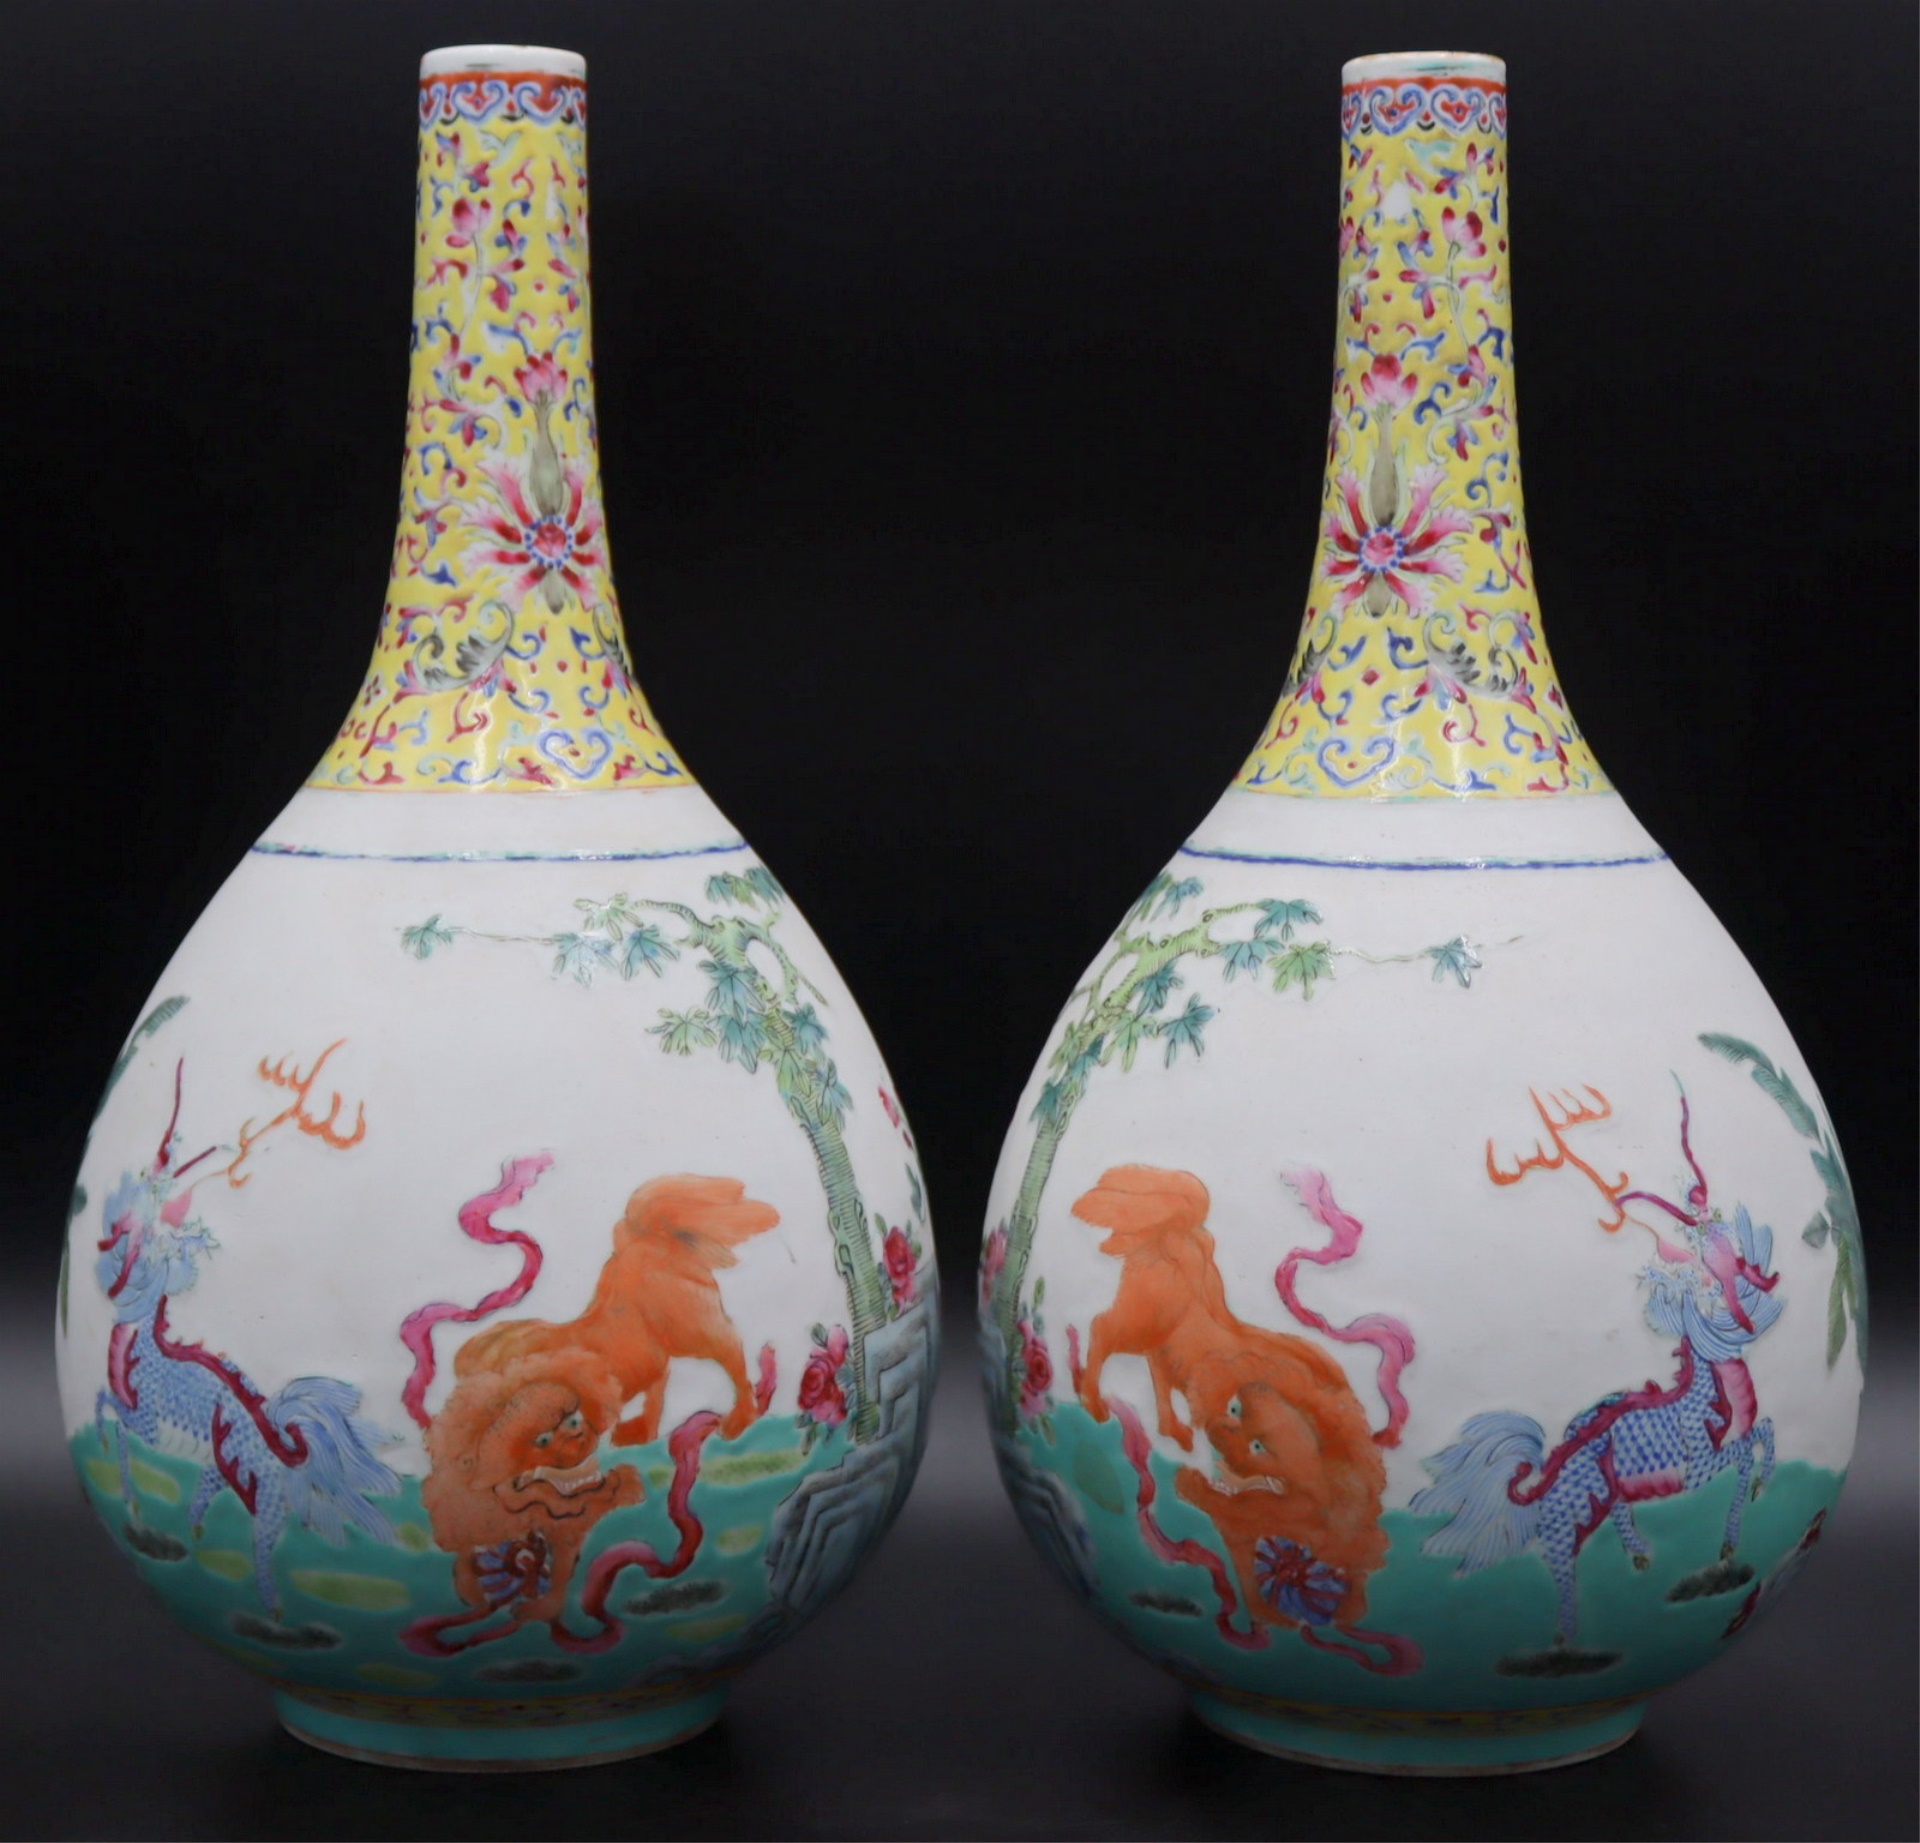 PAIR OF CHINESE FAMILLE ROSE BOTTLE